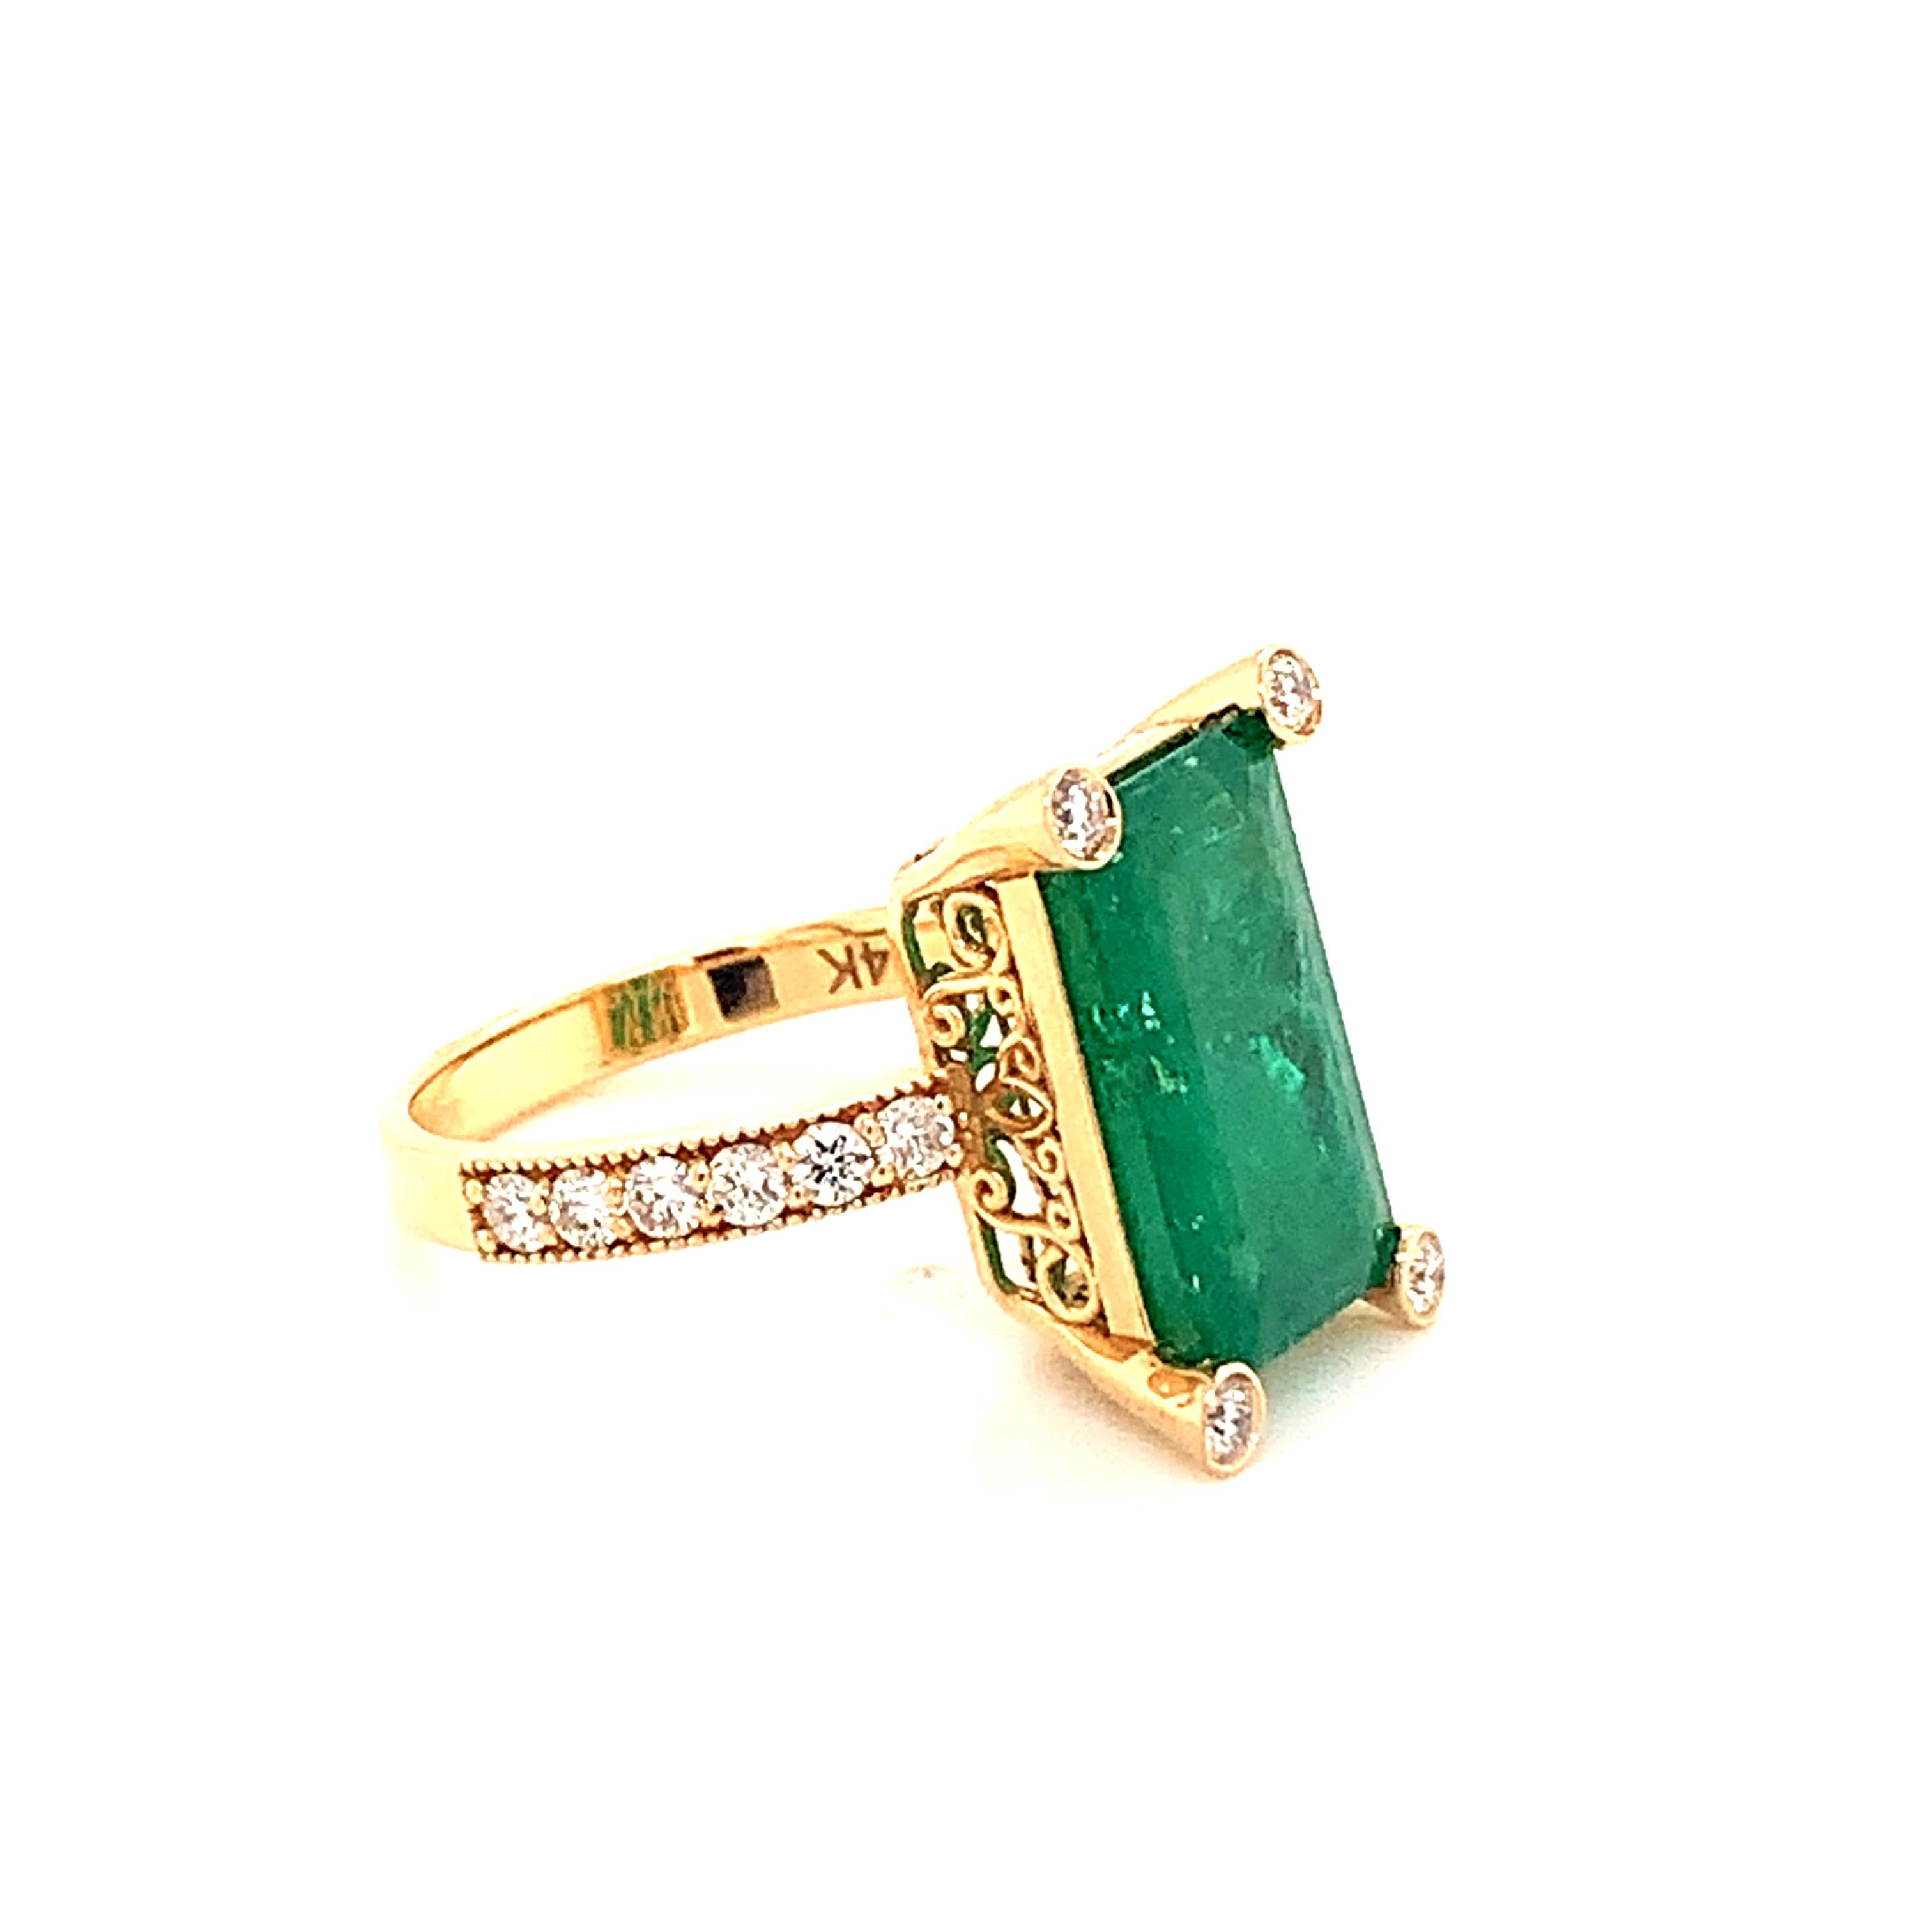 Natural Emerald Diamond Ring 14k Gold 4.37 TCW GIA Certified For Sale 2